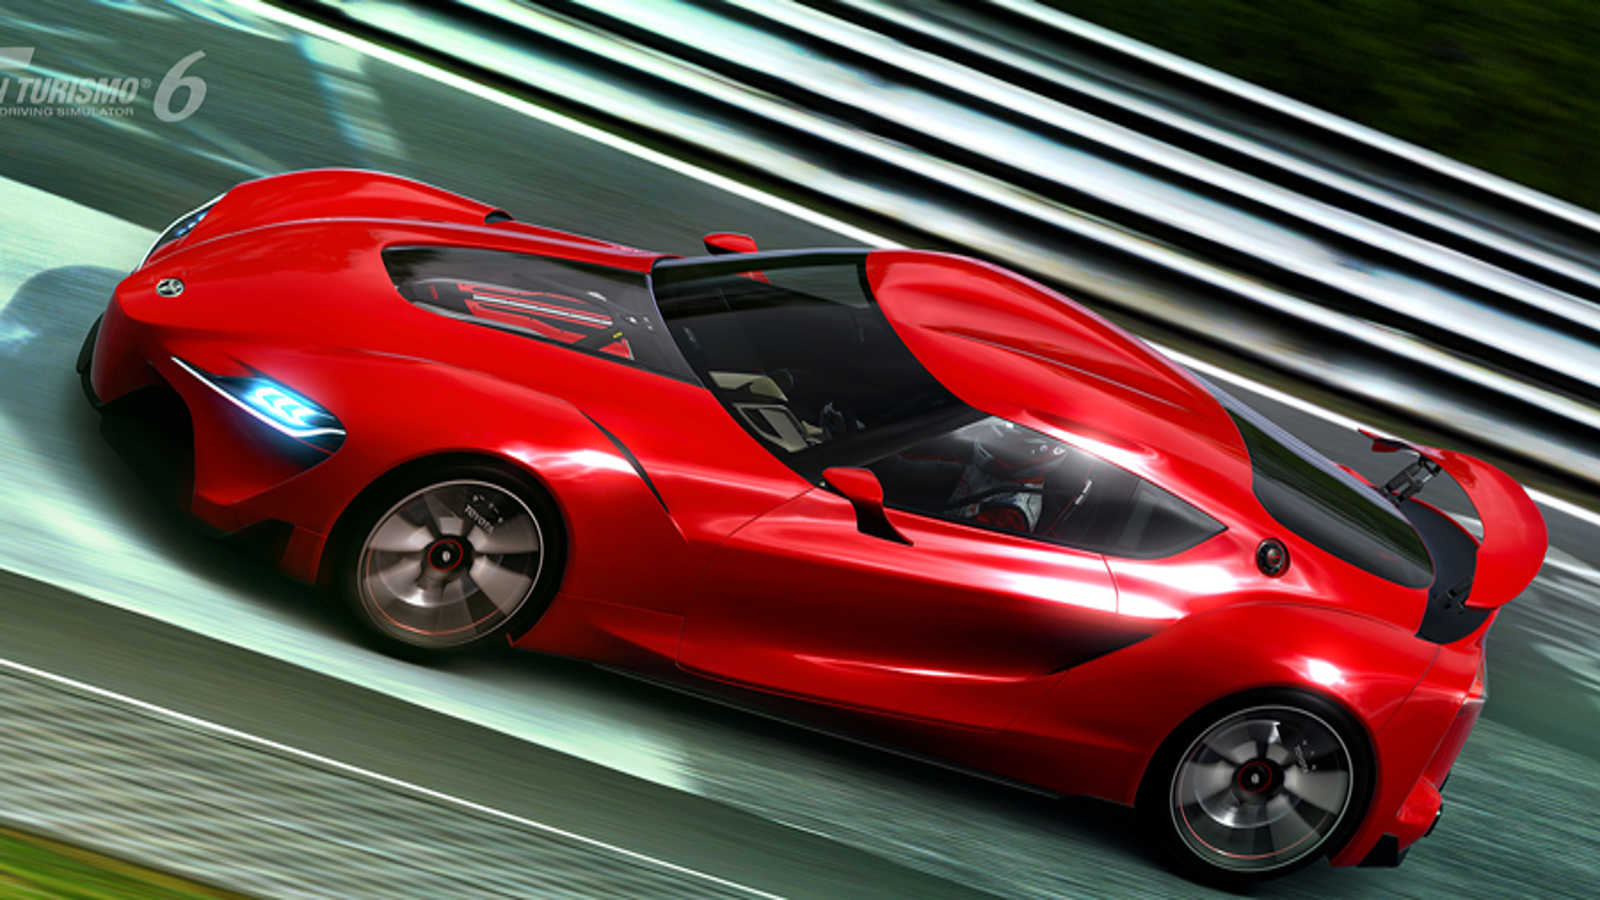 Drive the Toyota FT-1 Concept Coupé in Gran Turismo®6 